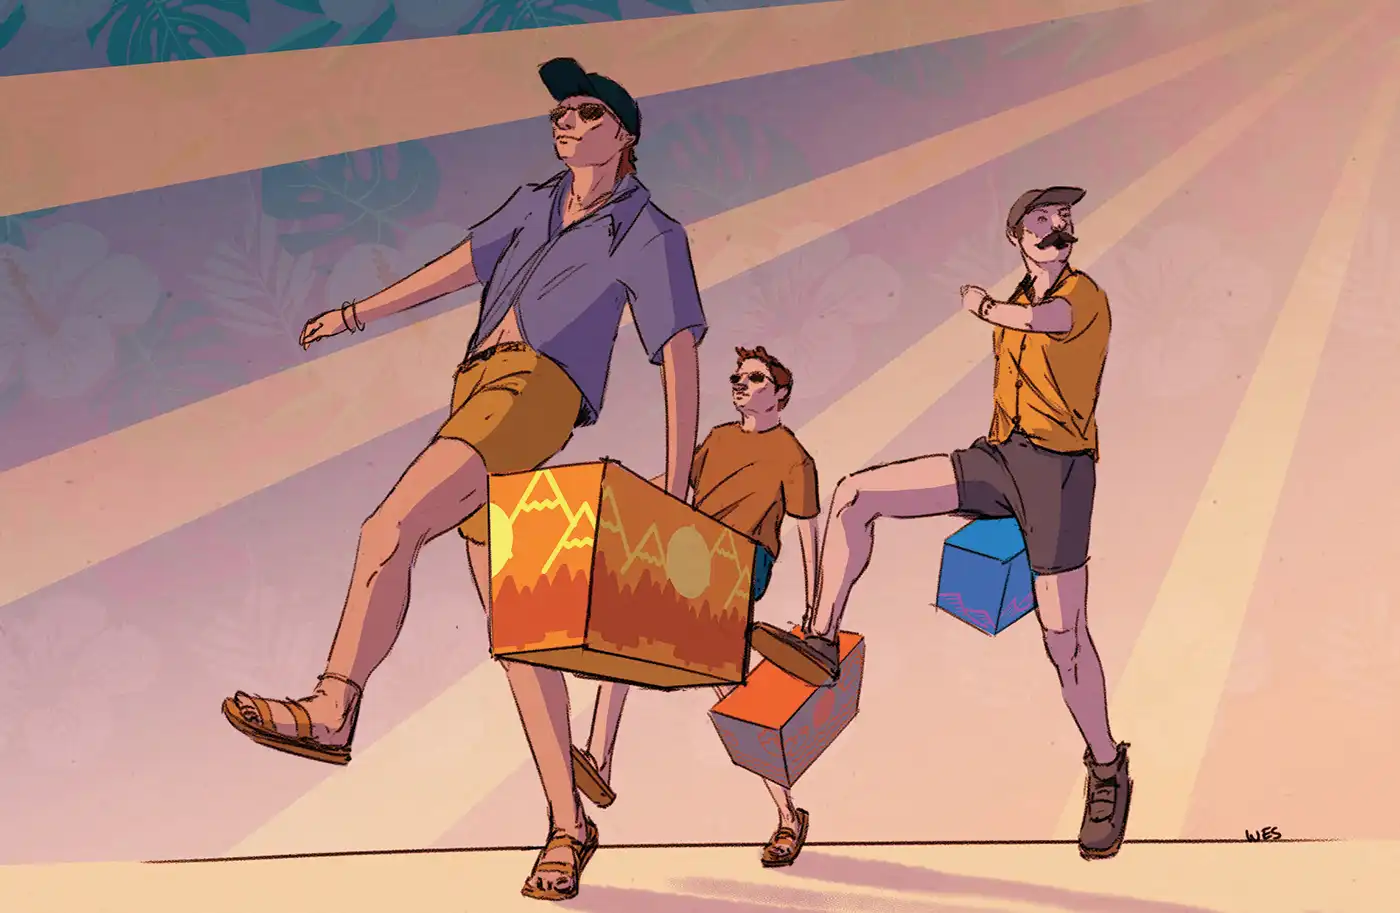 An illustration of three people marching forward with boxes of beer in tow. Illustration: Wes Wood